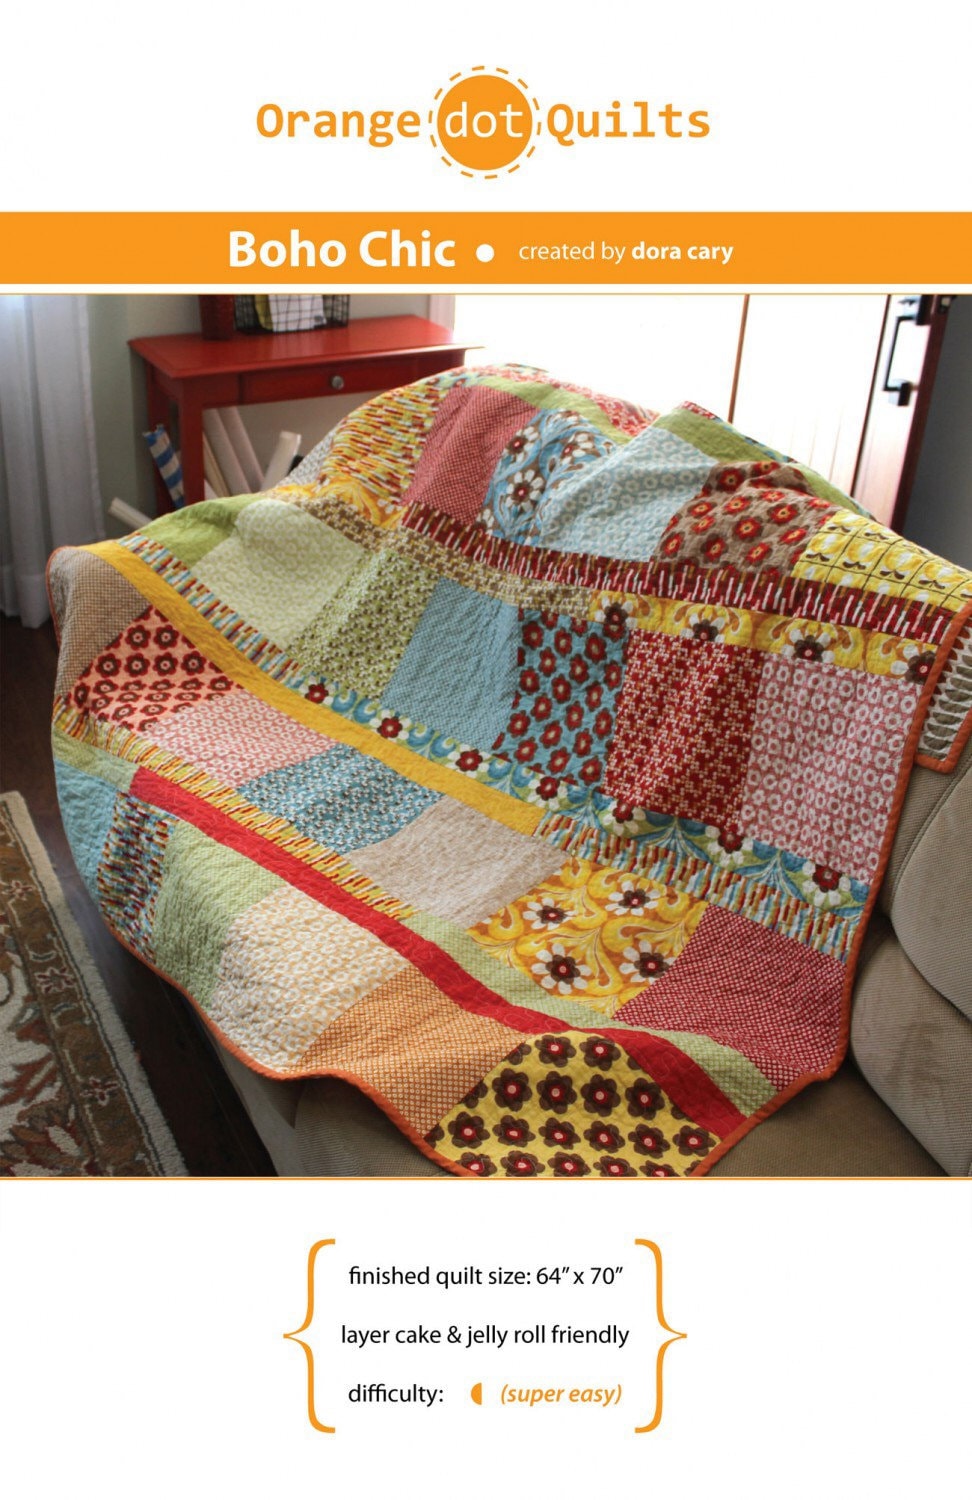 Boho Chic Quilt Pattern - Orange Dot Quilts - Dora Cary - Layer Cake Friendly